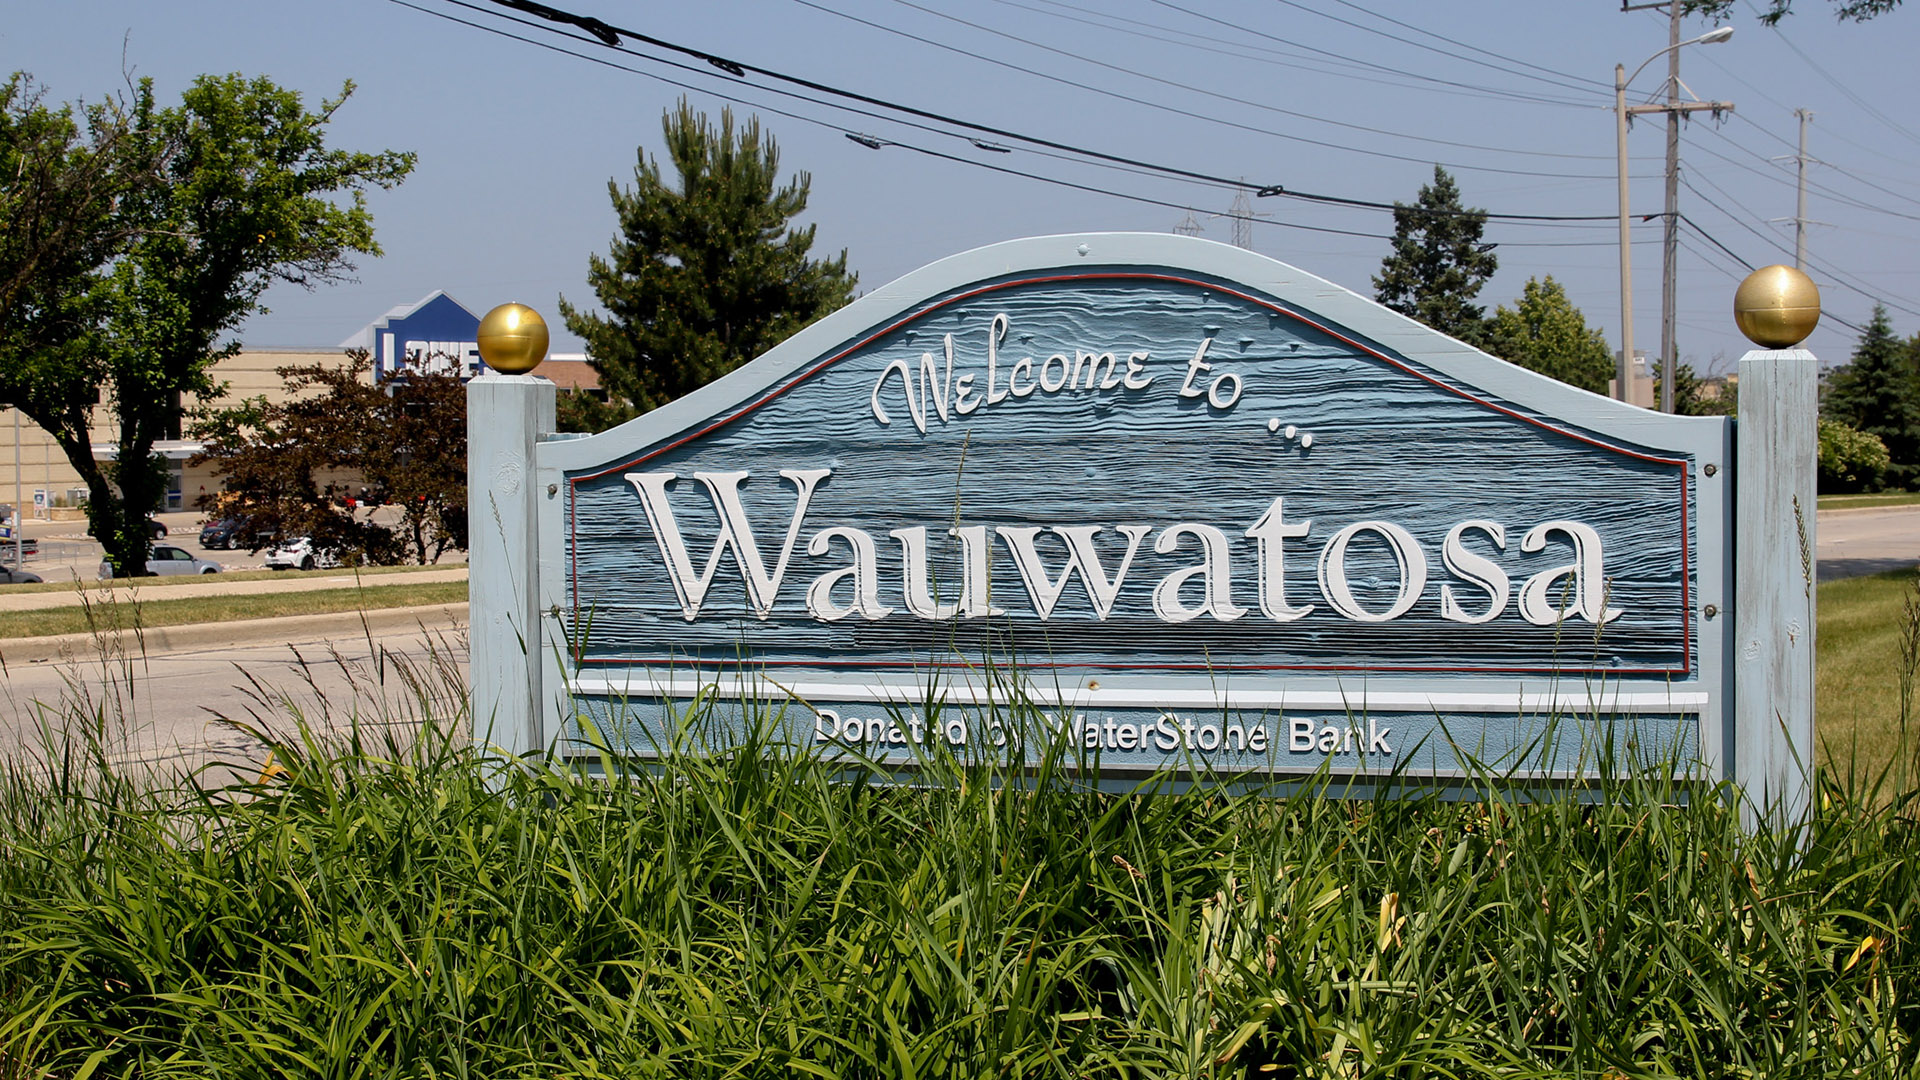 A carved wood sign in the form of a curved headboard with posts on either side features the words "Welcome to..." and "Wauwatosa," with plants at the bottom partially obscuring the words "Donated by WaterStone Bank," with a road, power lines, trees, buildings and a parking lot in the background.